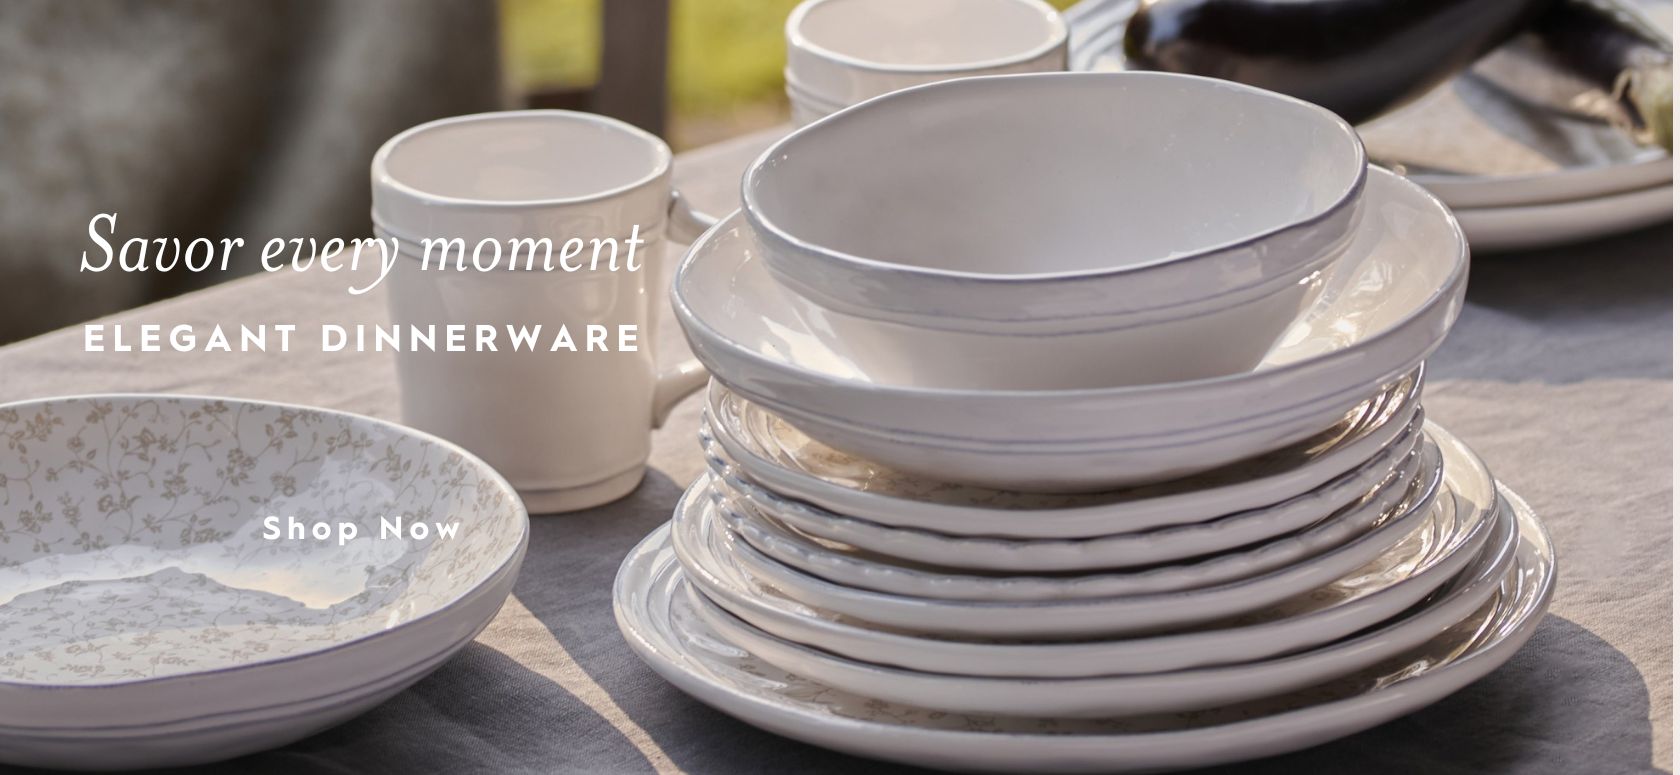 Artisans dinnerware stacked on a table in outdoor setting.